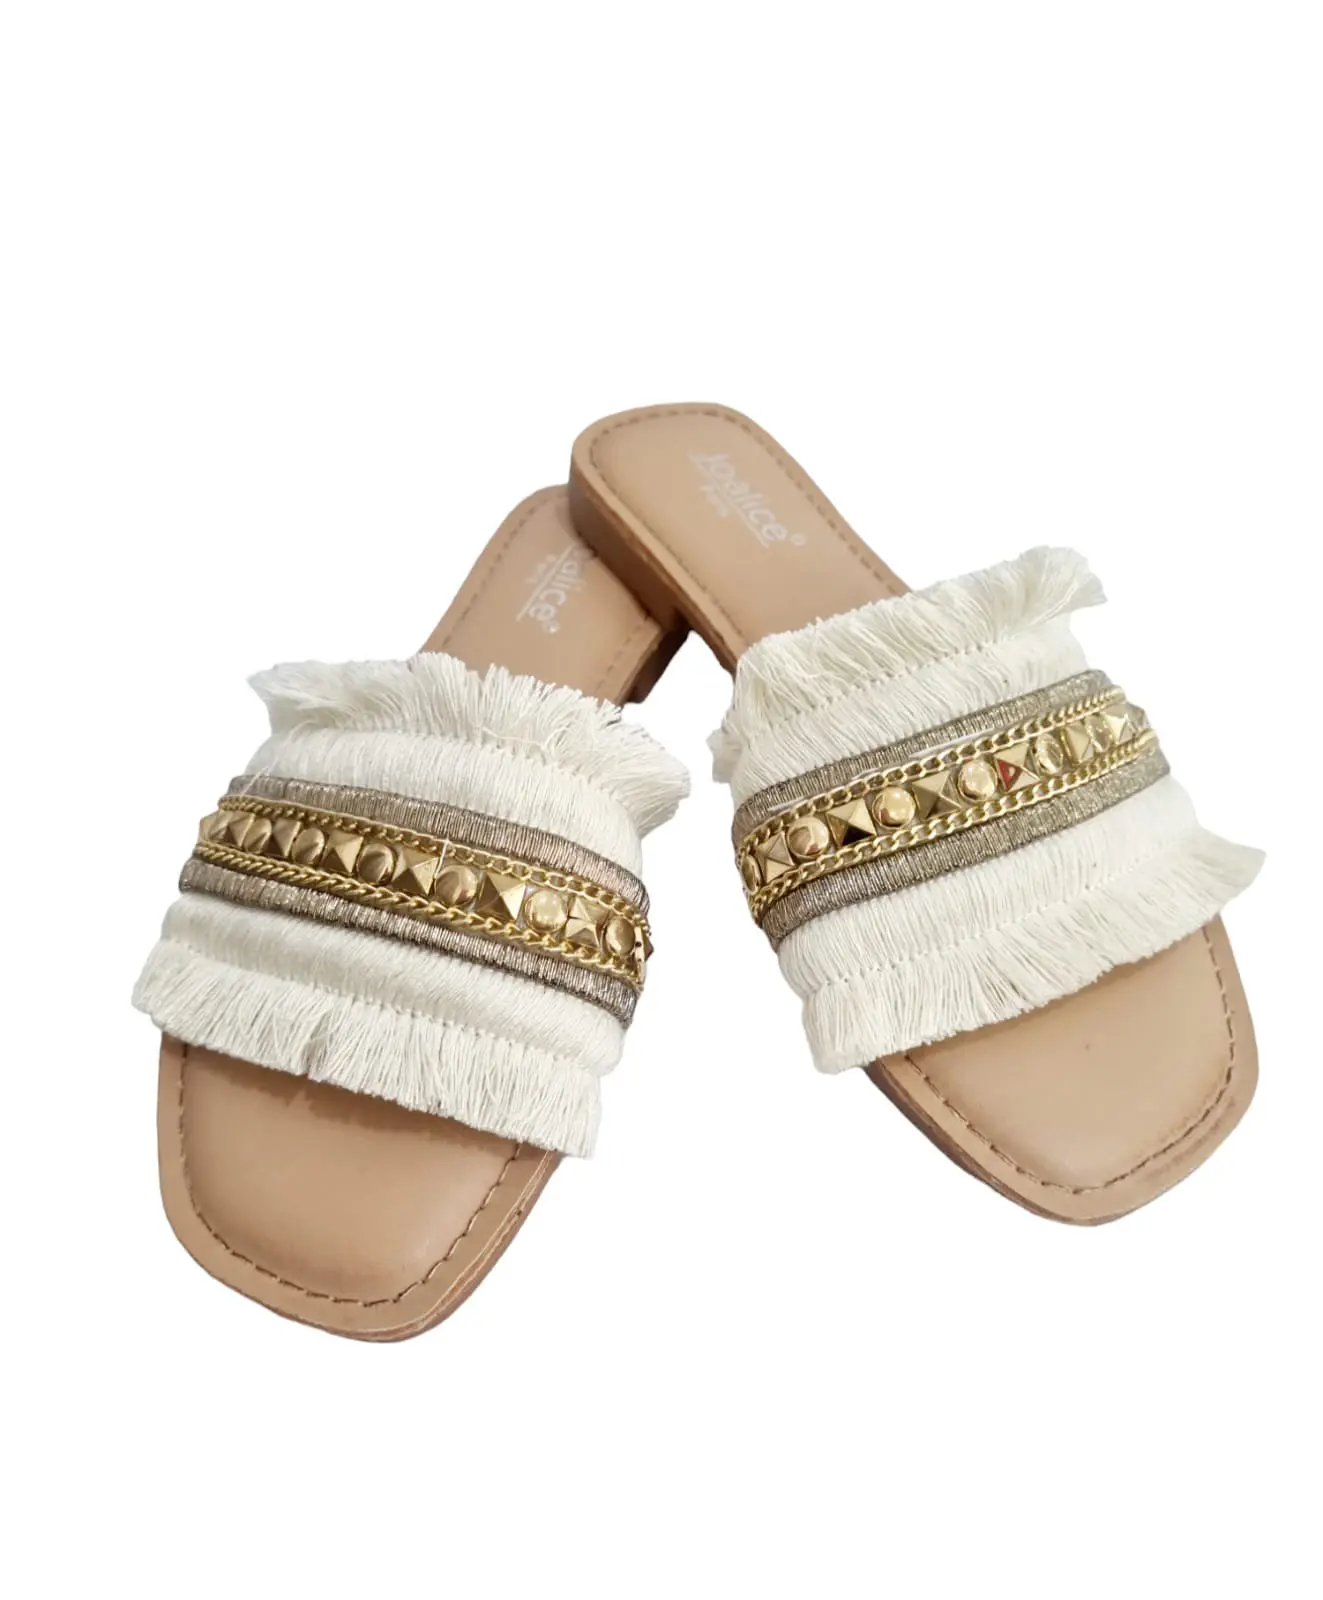 Slippers with fringes 1.5cm rise, non-slip sole. Light beige and gold color